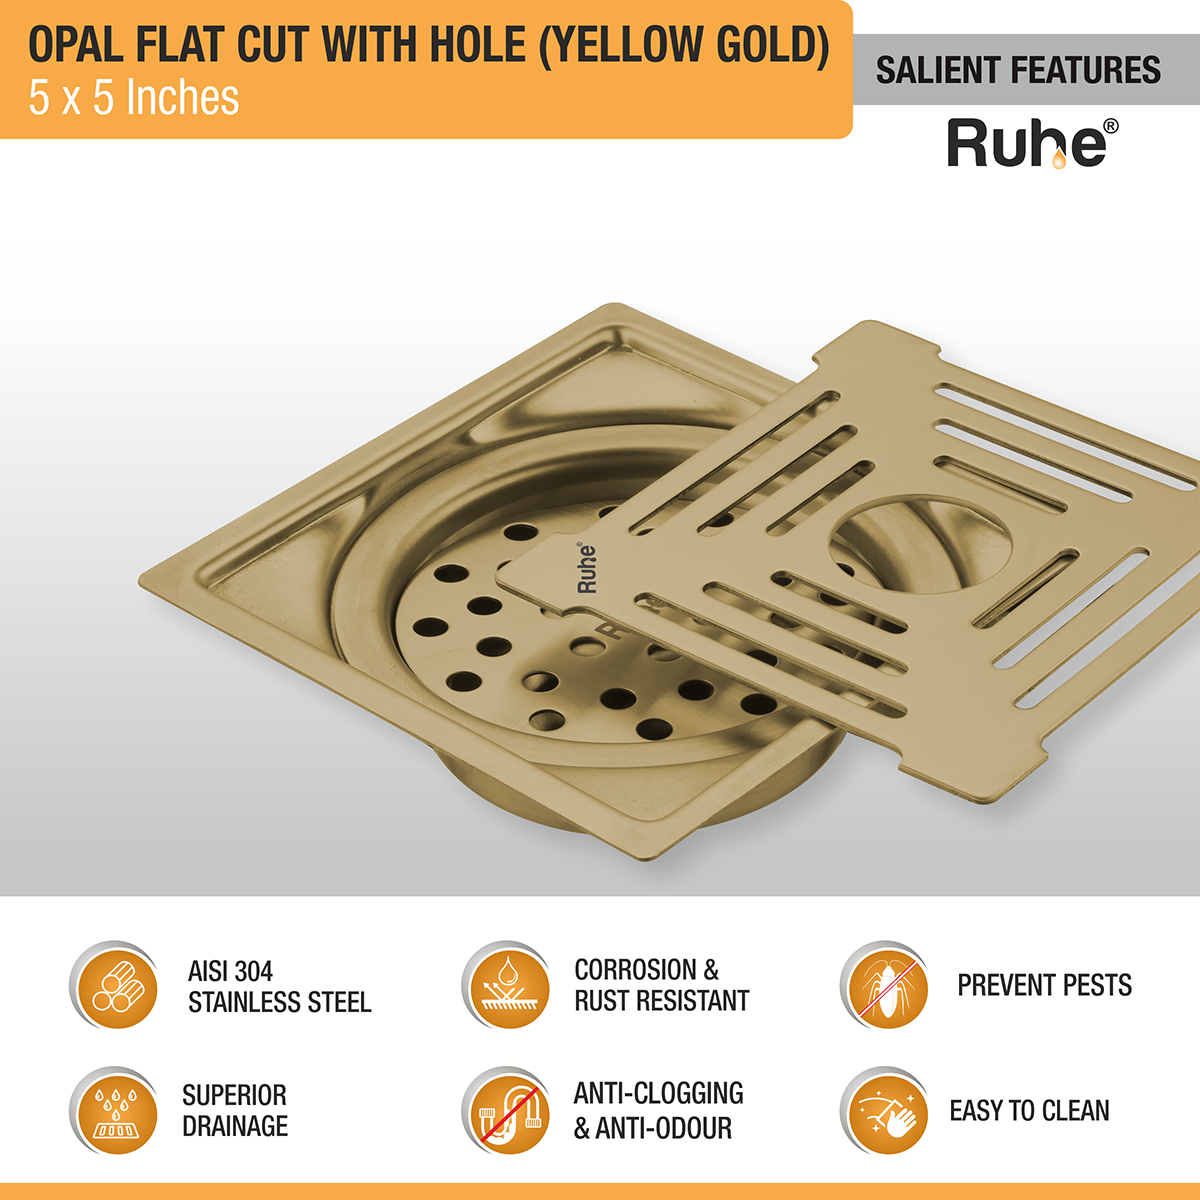 Opal Square Flat Cut Floor Drain in Yellow Gold PVD Coating (5 x 5 Inches) with Hole features